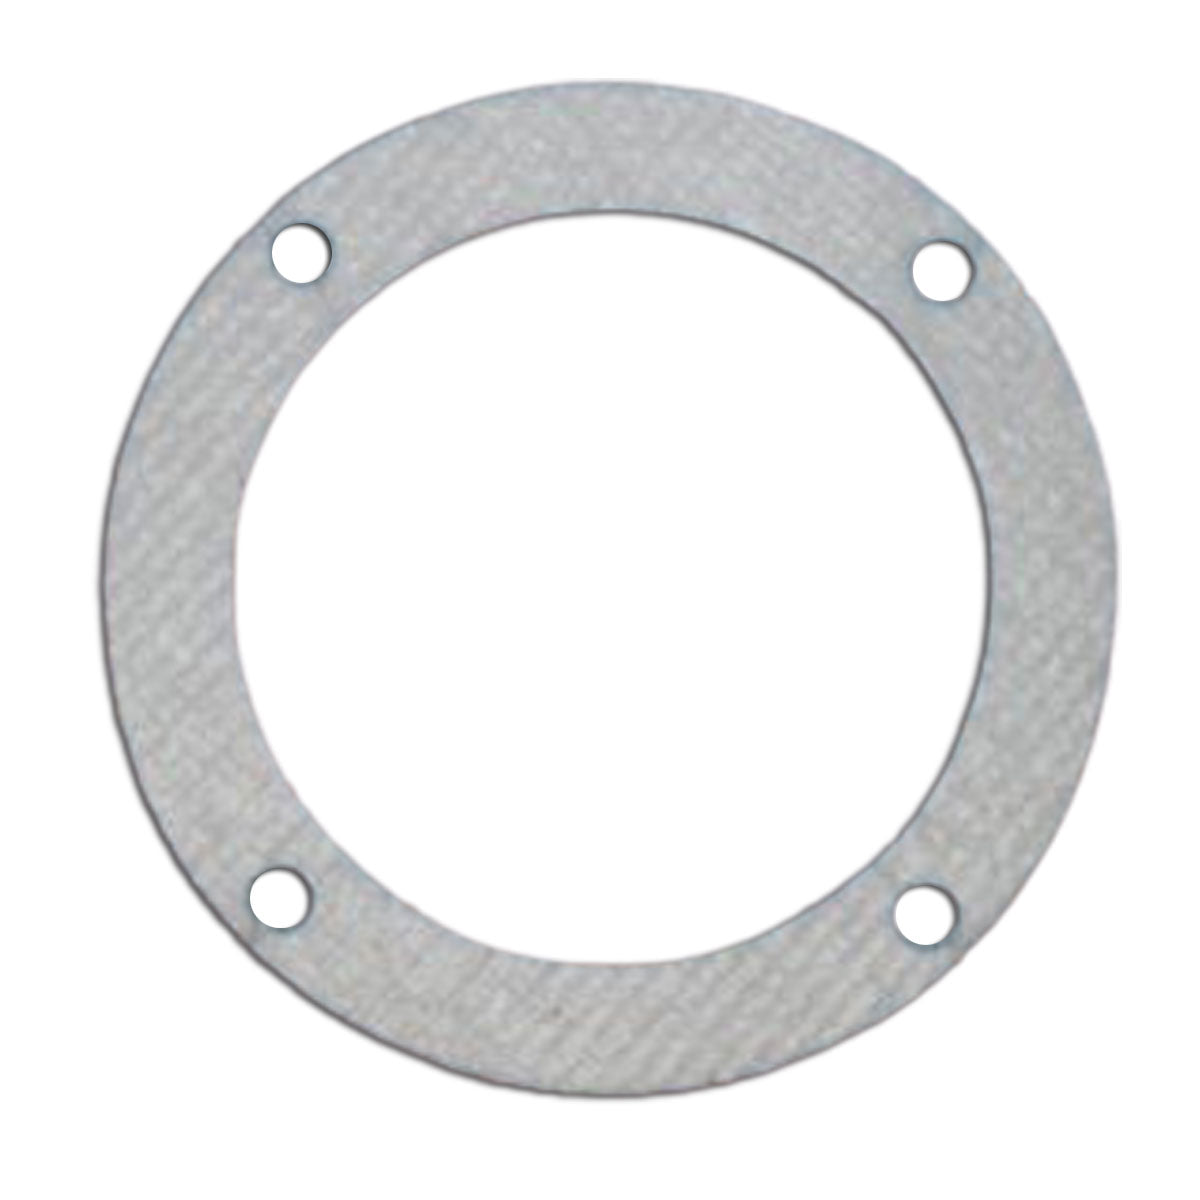 Orton Vent Master Replacement Cup Gasket